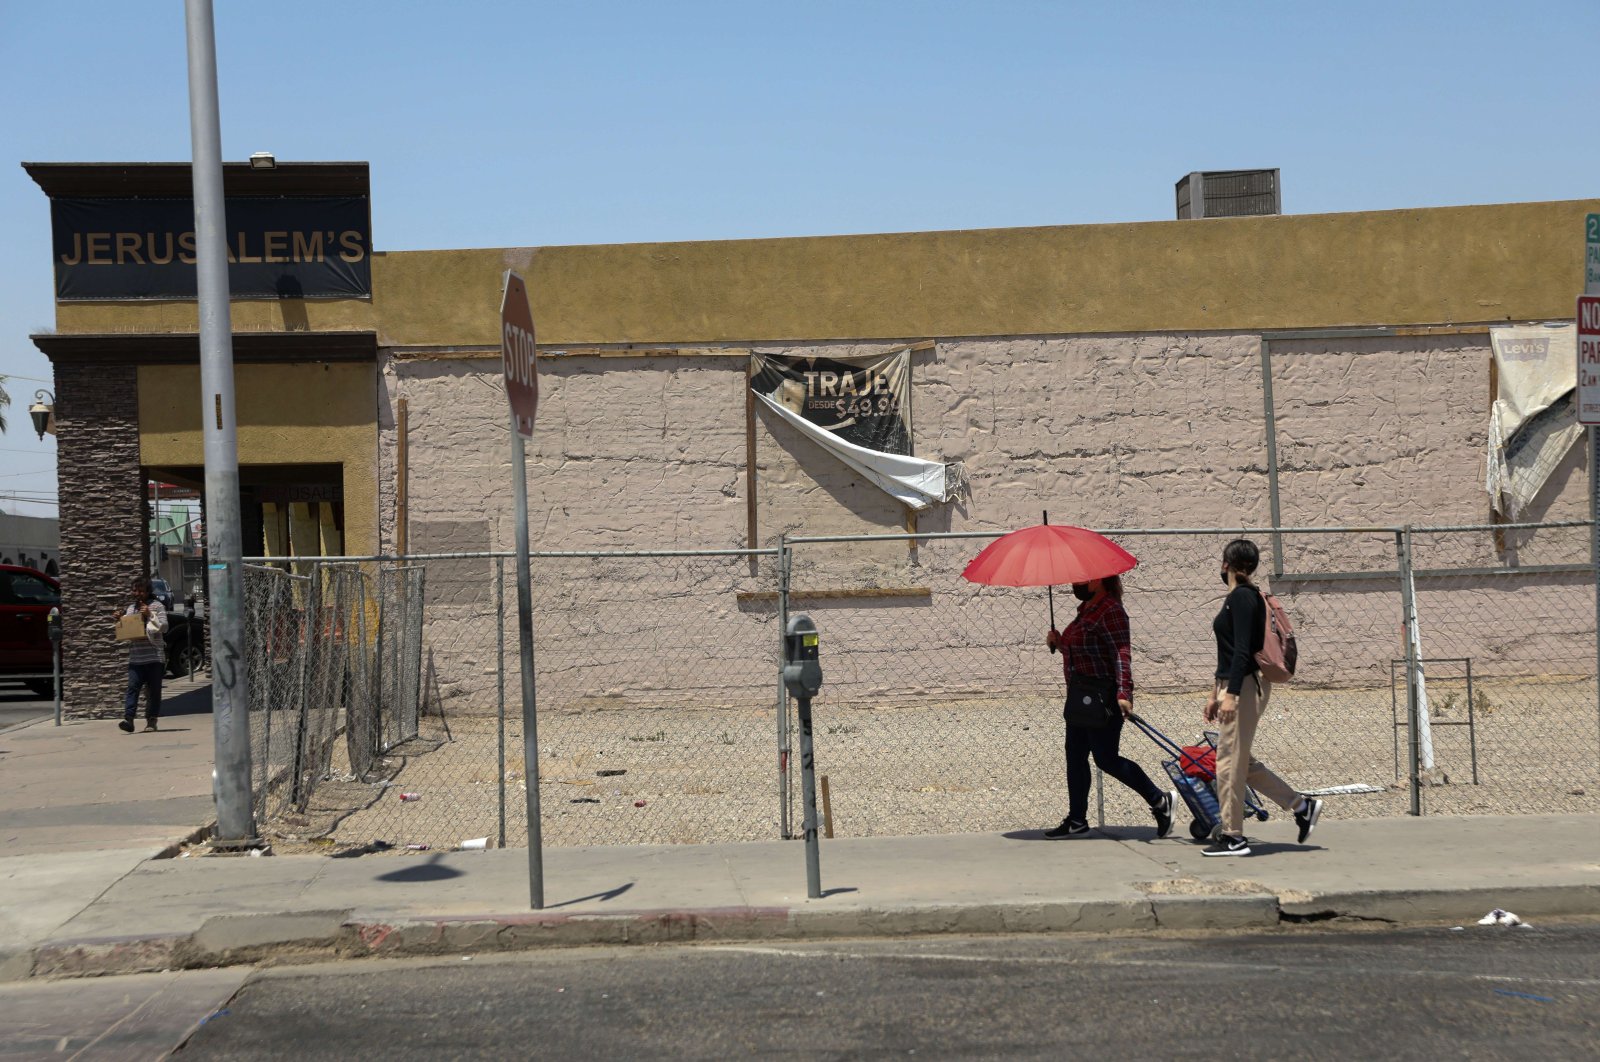 People walk downtown as the temperature reached around 115 degrees Fahrenheit (46.11 degrees Celsius) in Calexico, California, U.S., June 12, 2022. (AFP Photo)